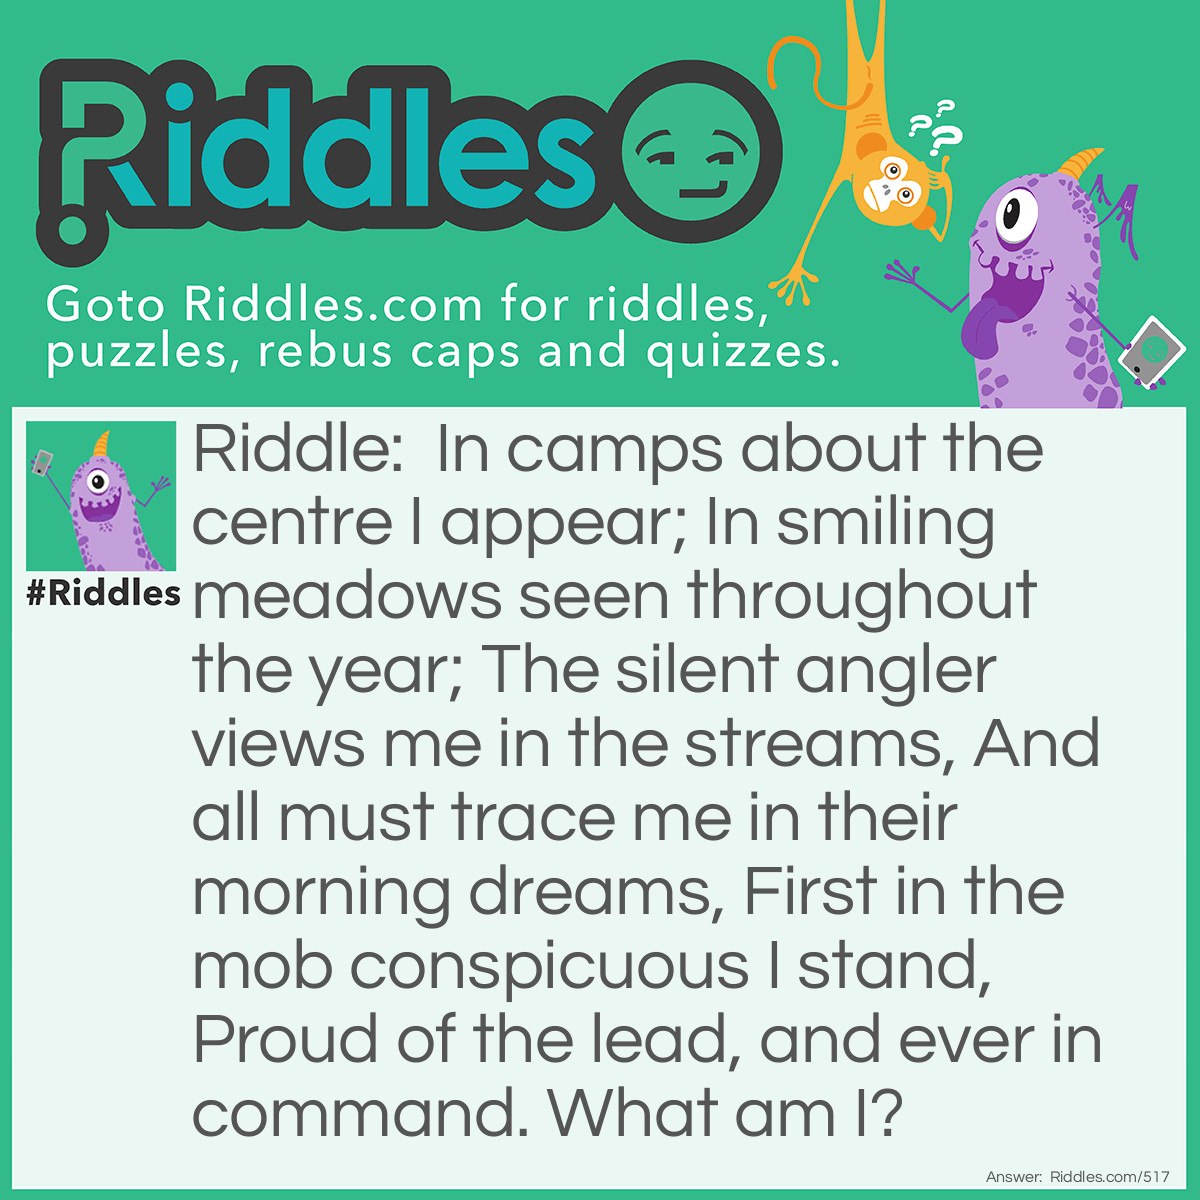 Riddle: In camps about the centre I appear;
In smiling meadows seen throughout the year;
The silent angler views me in the streams,
And all must trace me in their morning dreams,
First in the mob conspicuous I stand,
Proud of the lead, and ever in command.
What am I? Answer: The letter M.